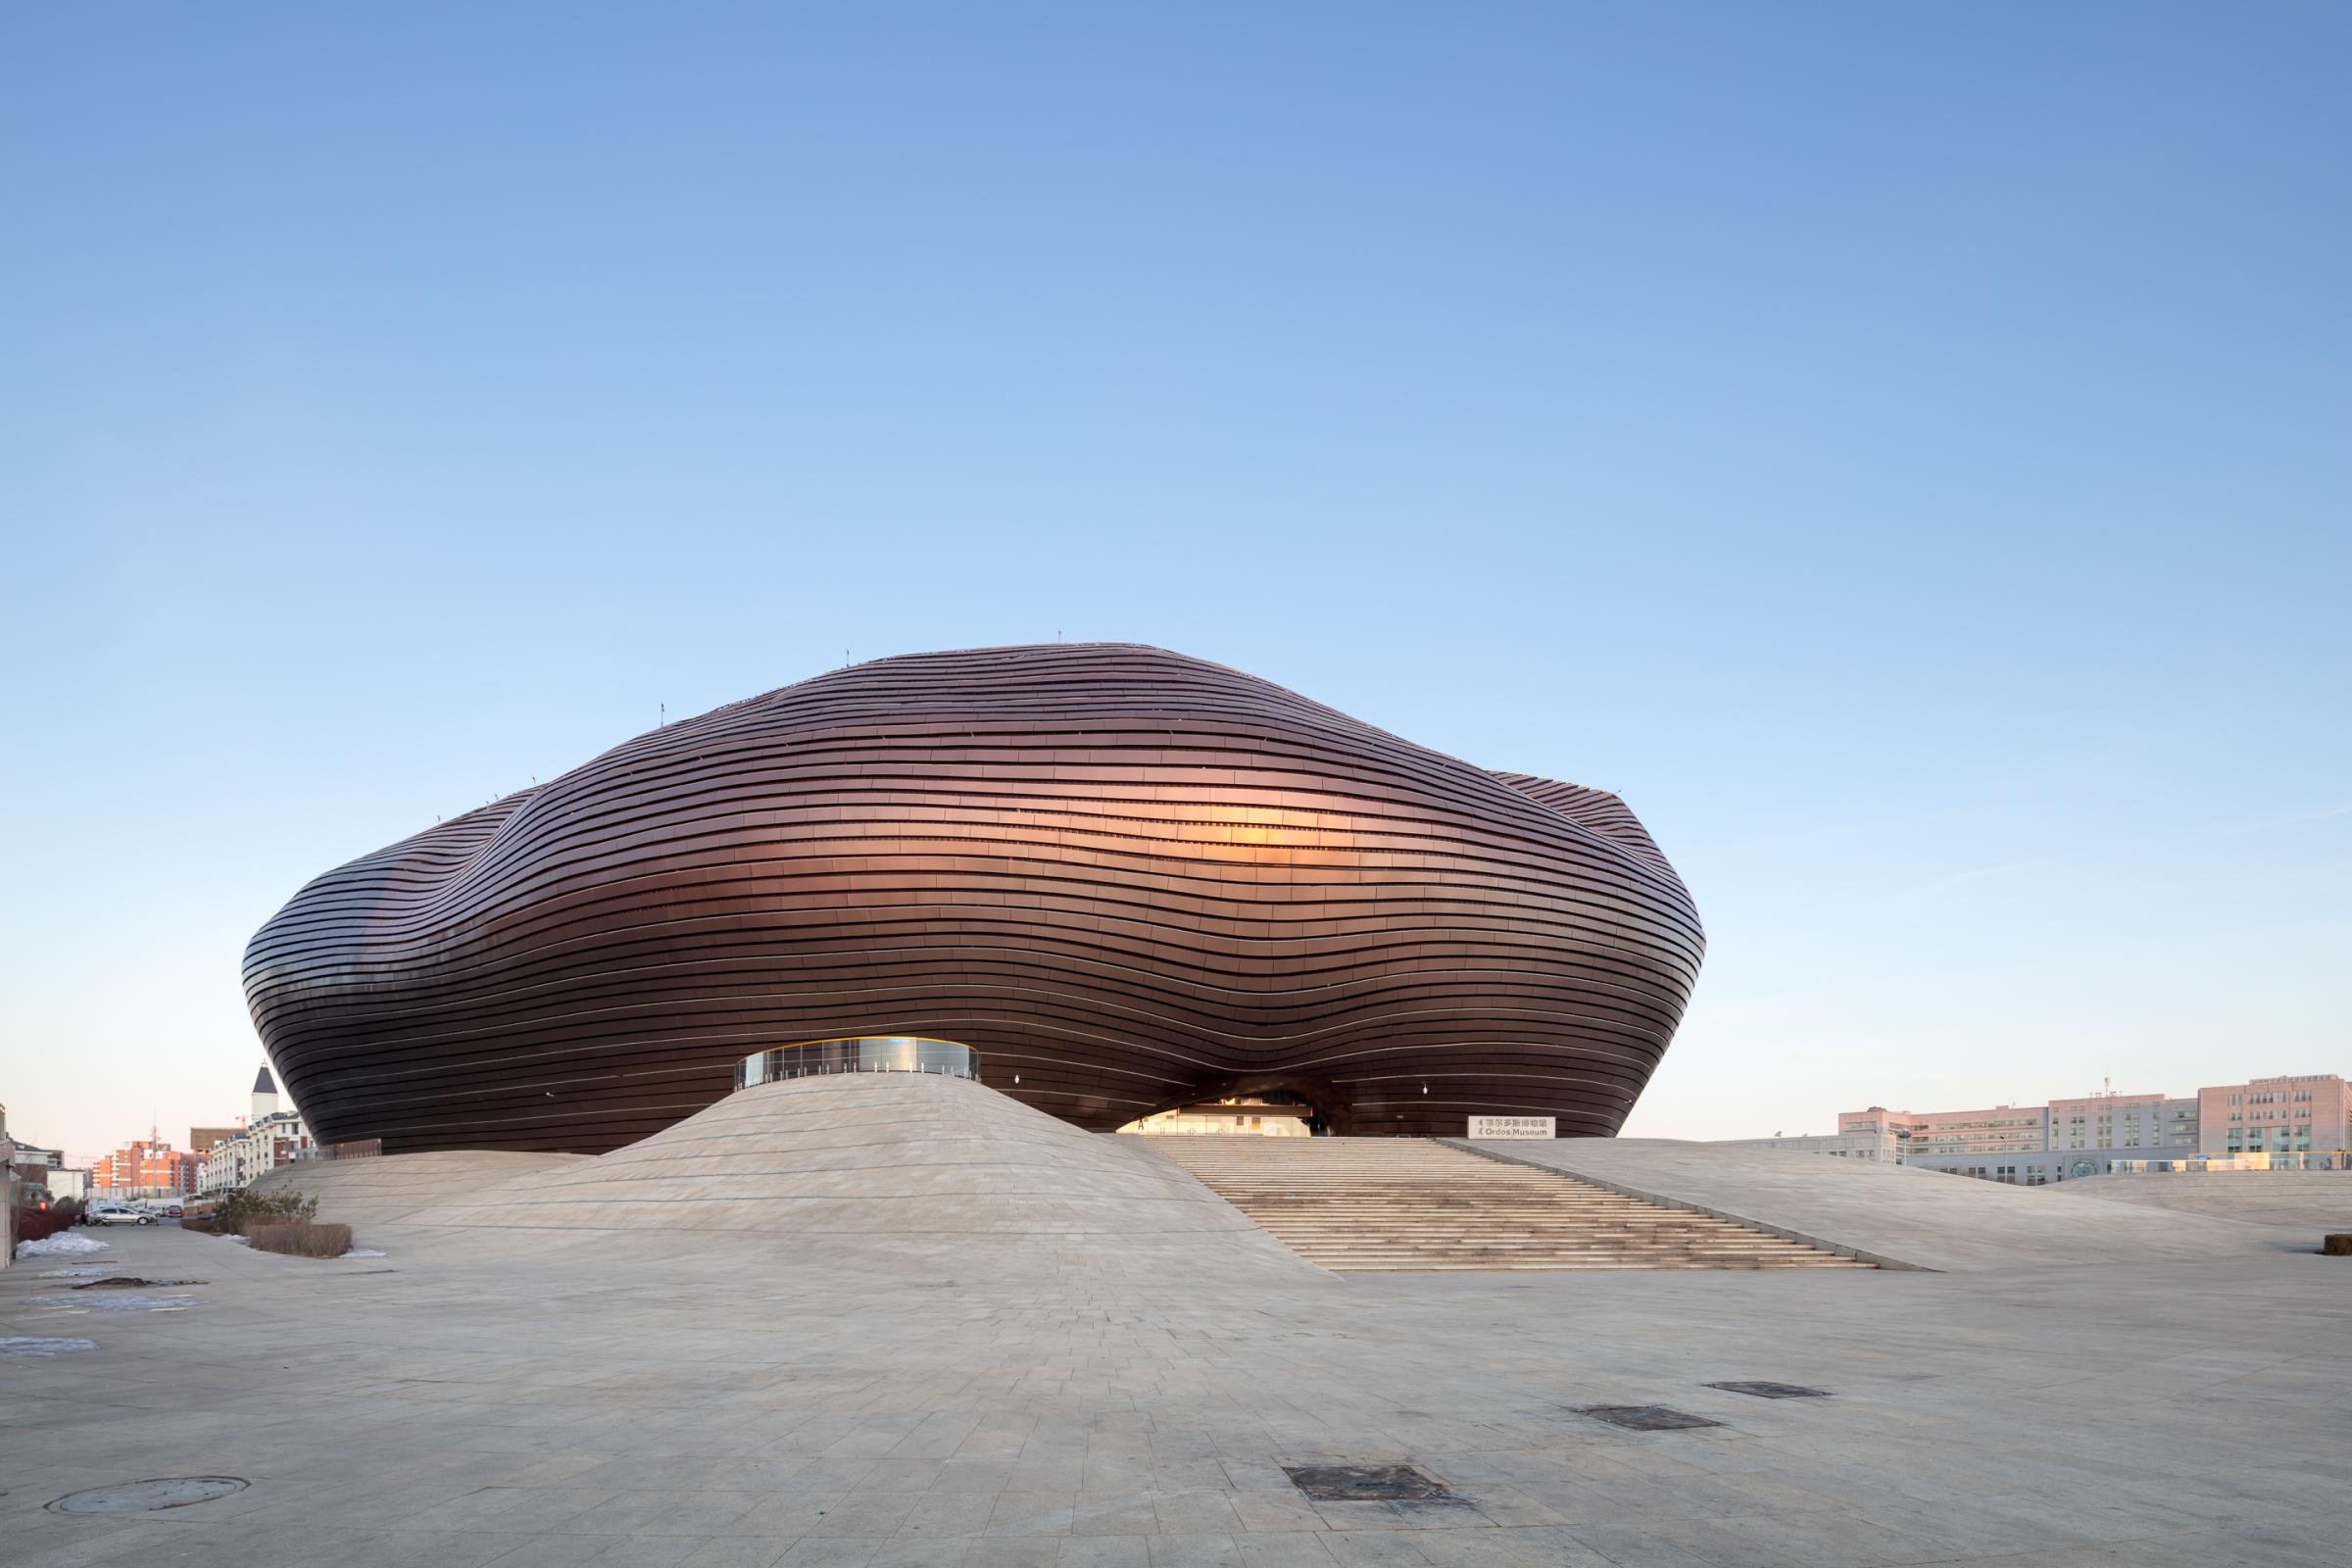 Photograph of Ordos Museum, designed by MAD Architects and located in Ordos, China